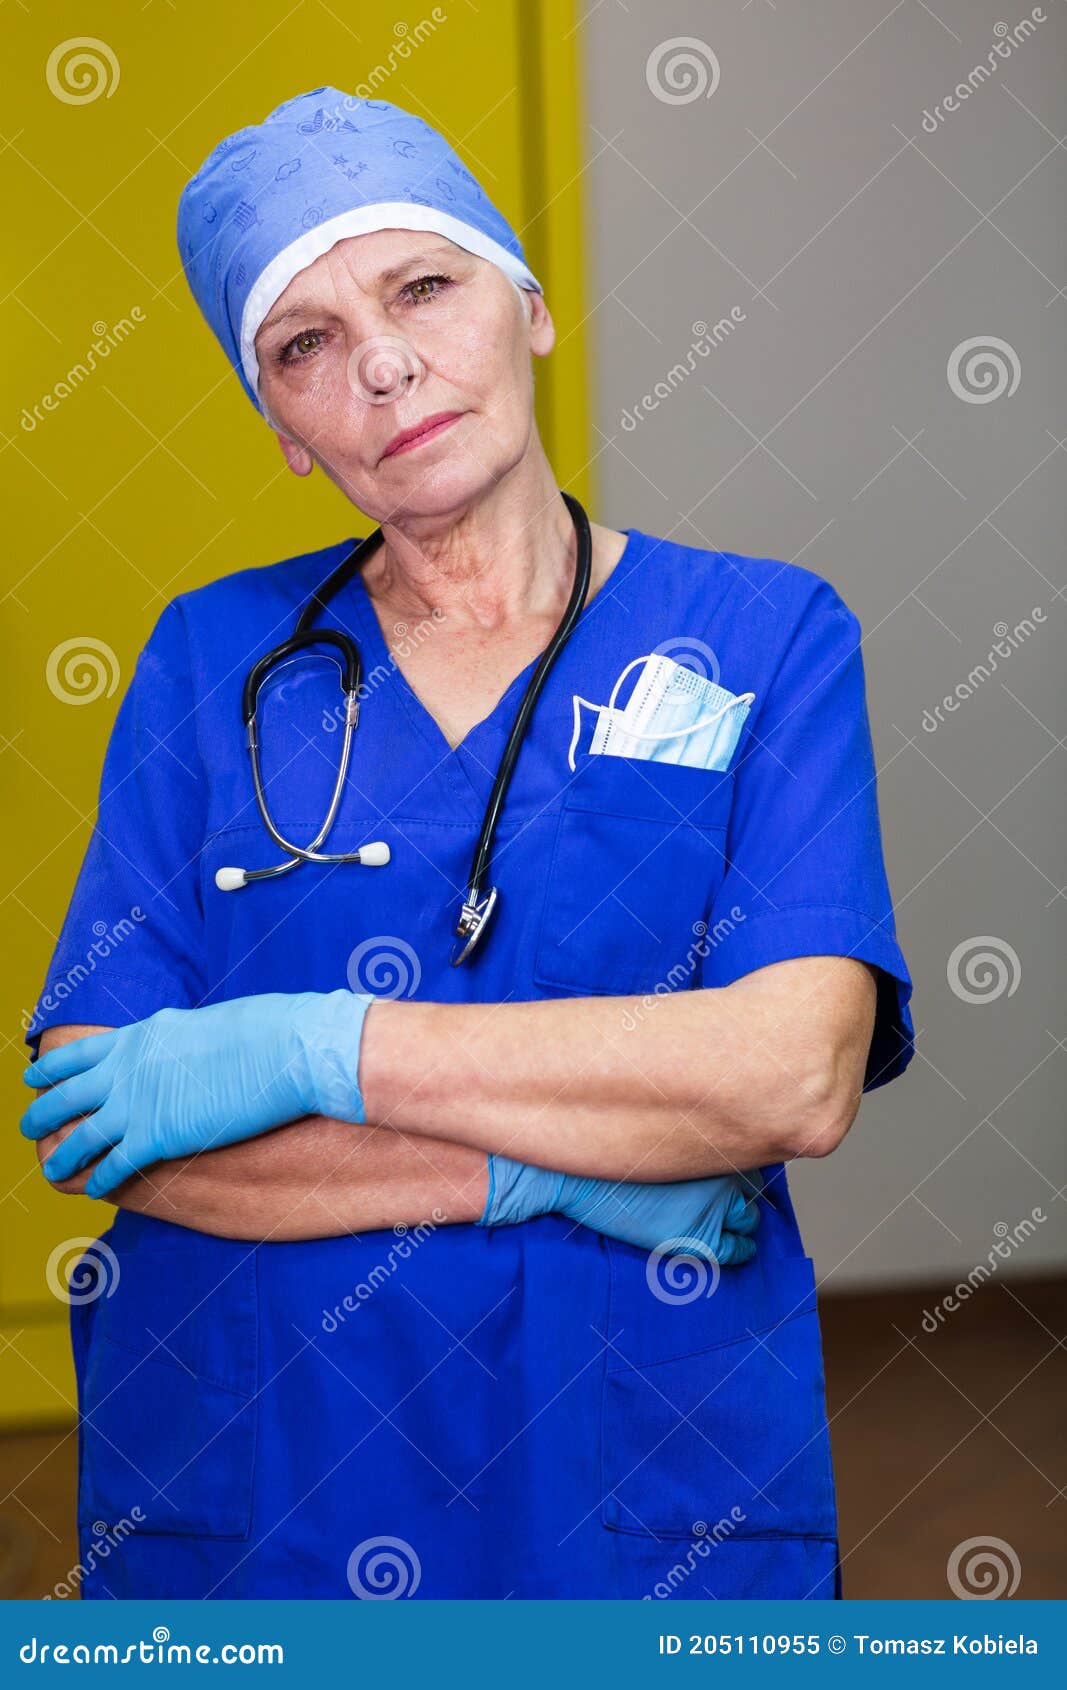 a doctor in a surgical cap wearing blue gloves and stethoscope